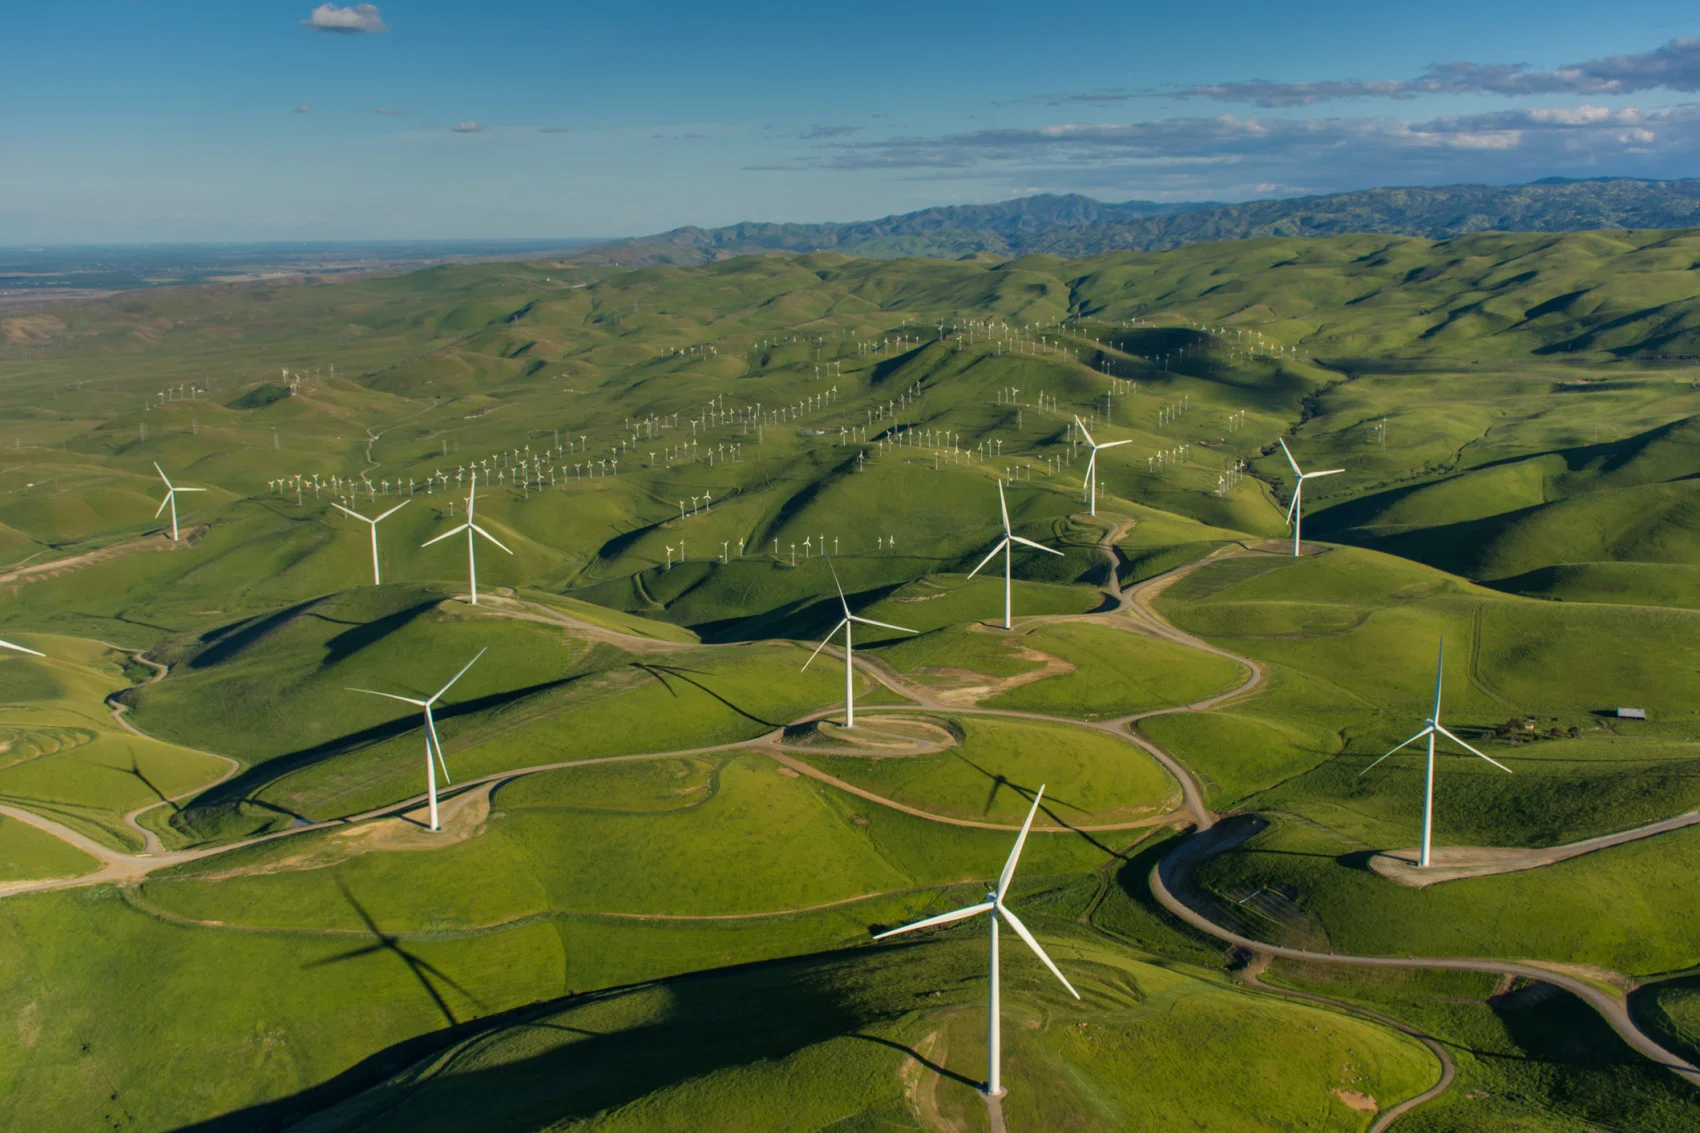 2021 was a "record year of growth" for renewable energy, IEA report says